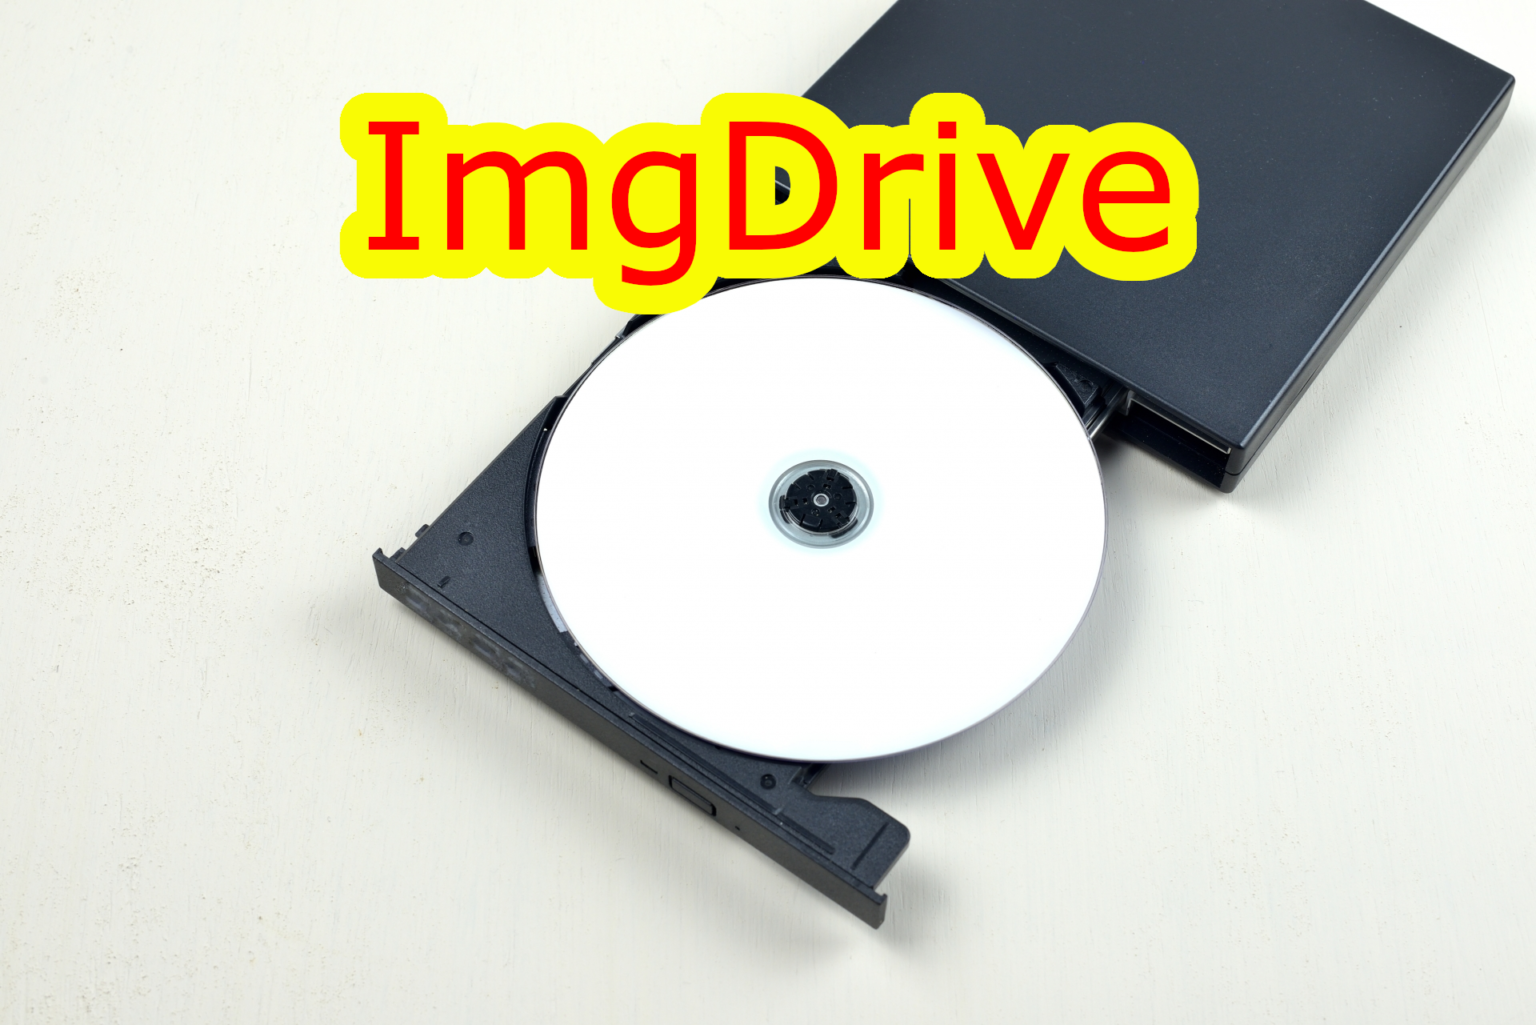 download the last version for mac ImgDrive 2.0.7.0